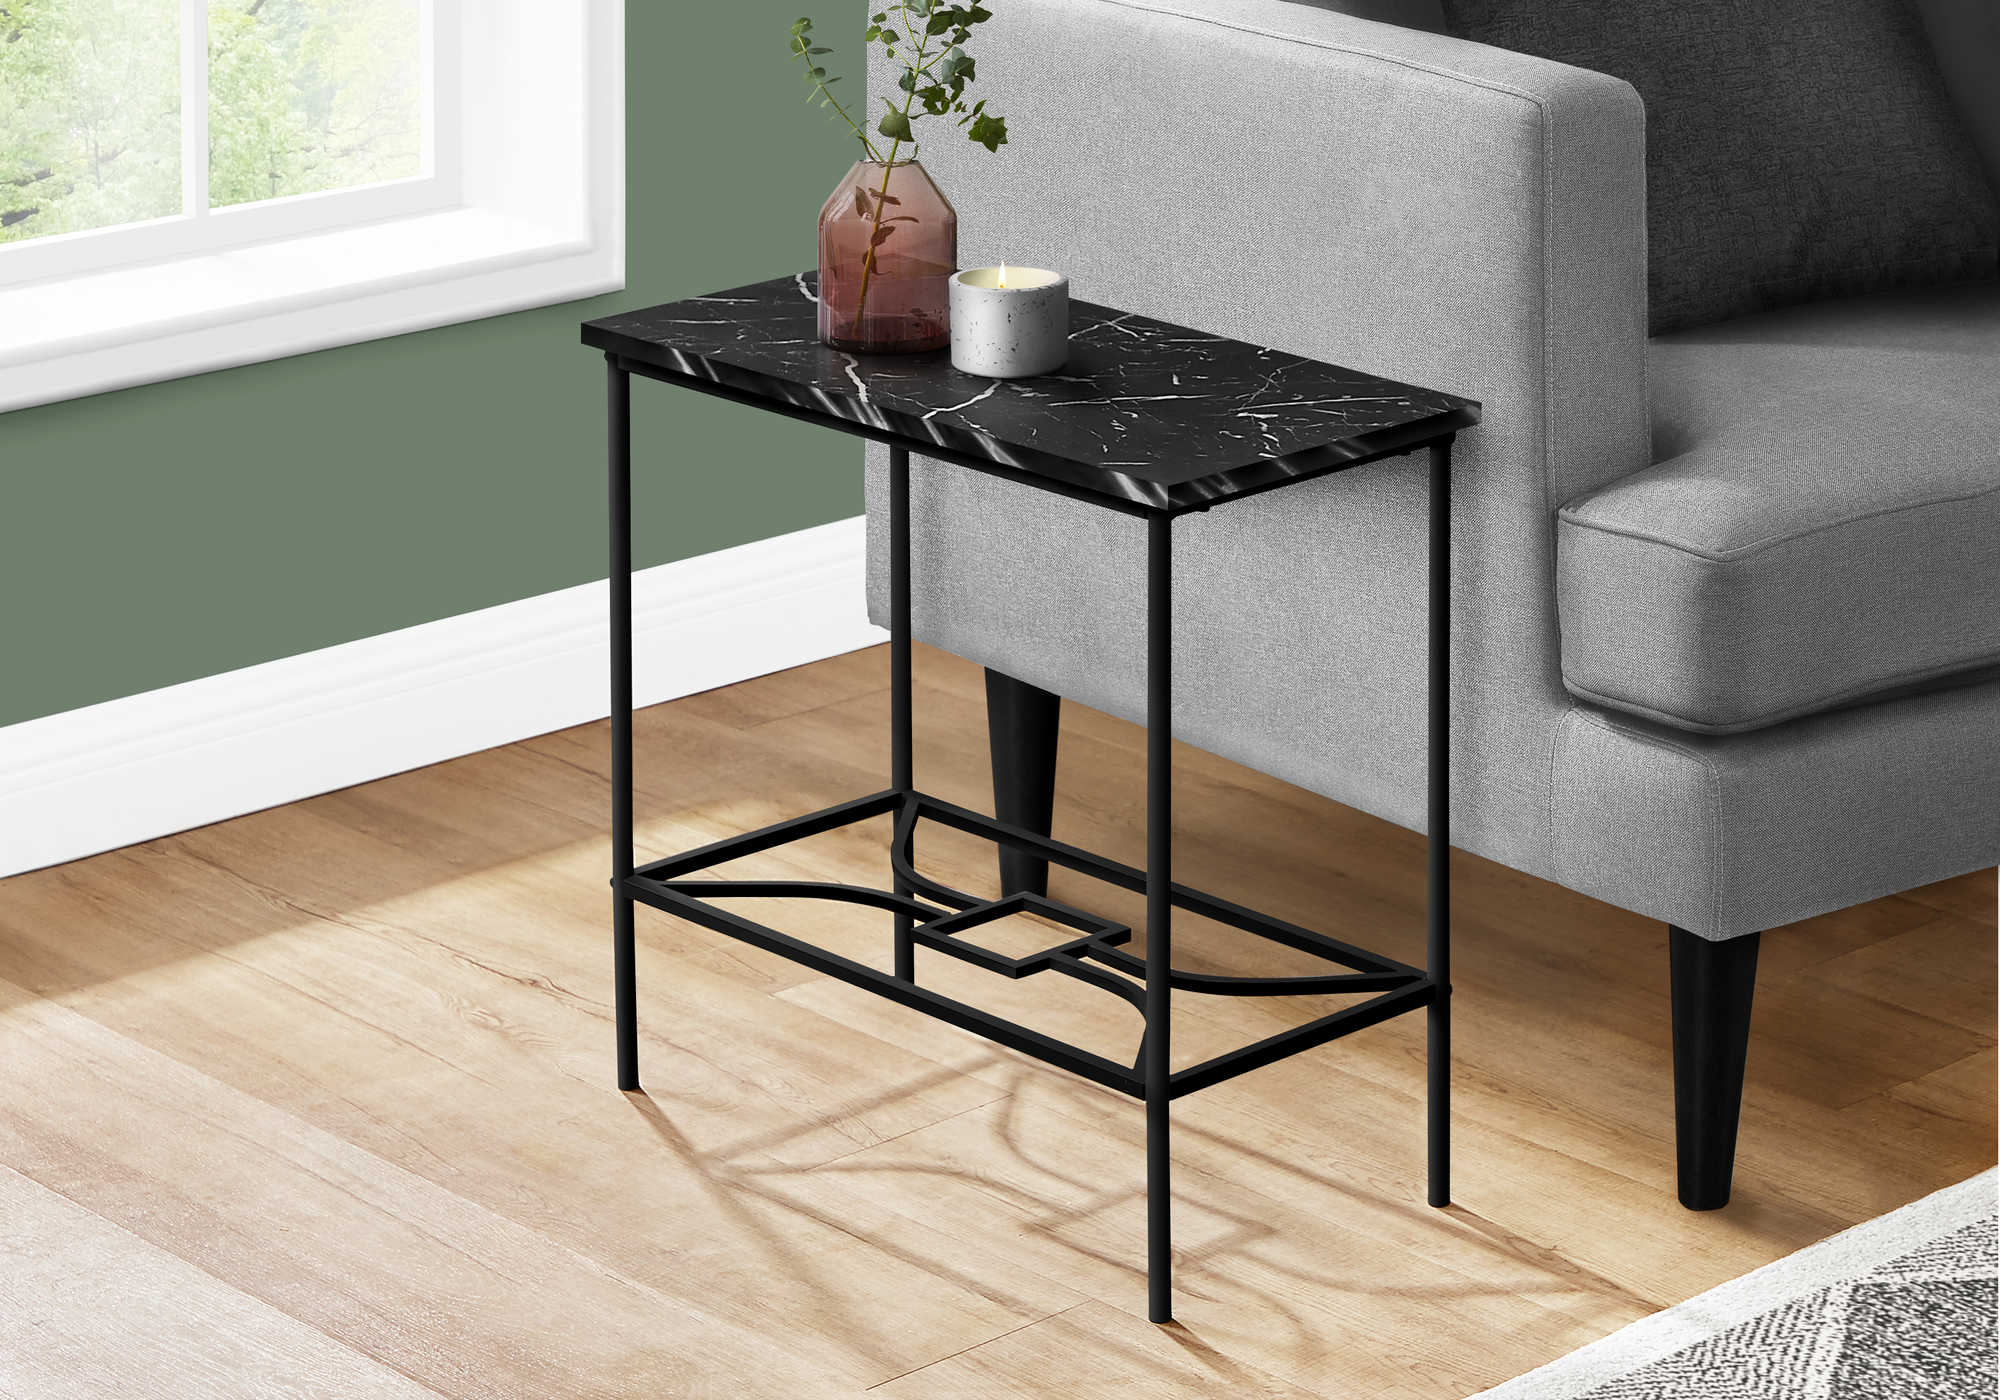 ACCENT TABLE - 22"H / BLACK MARBLE / BLACK METAL